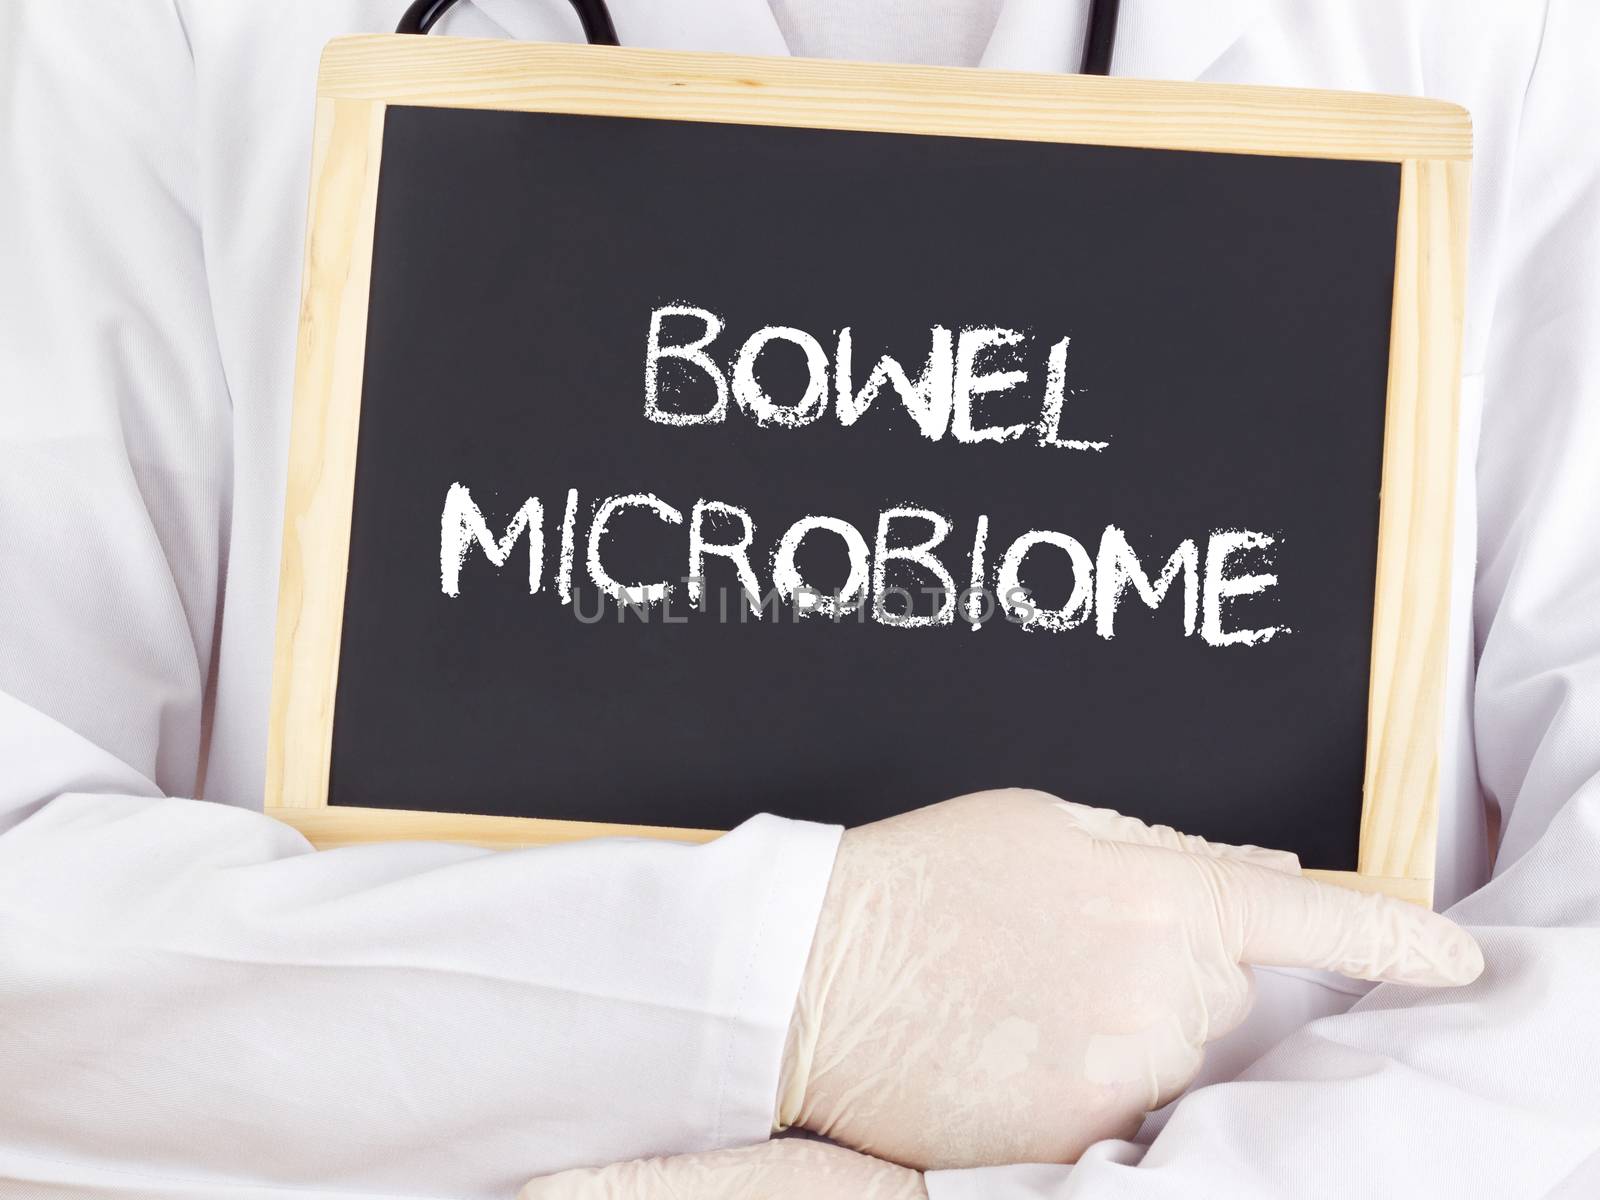 Doctor shows information: bowel microbiome